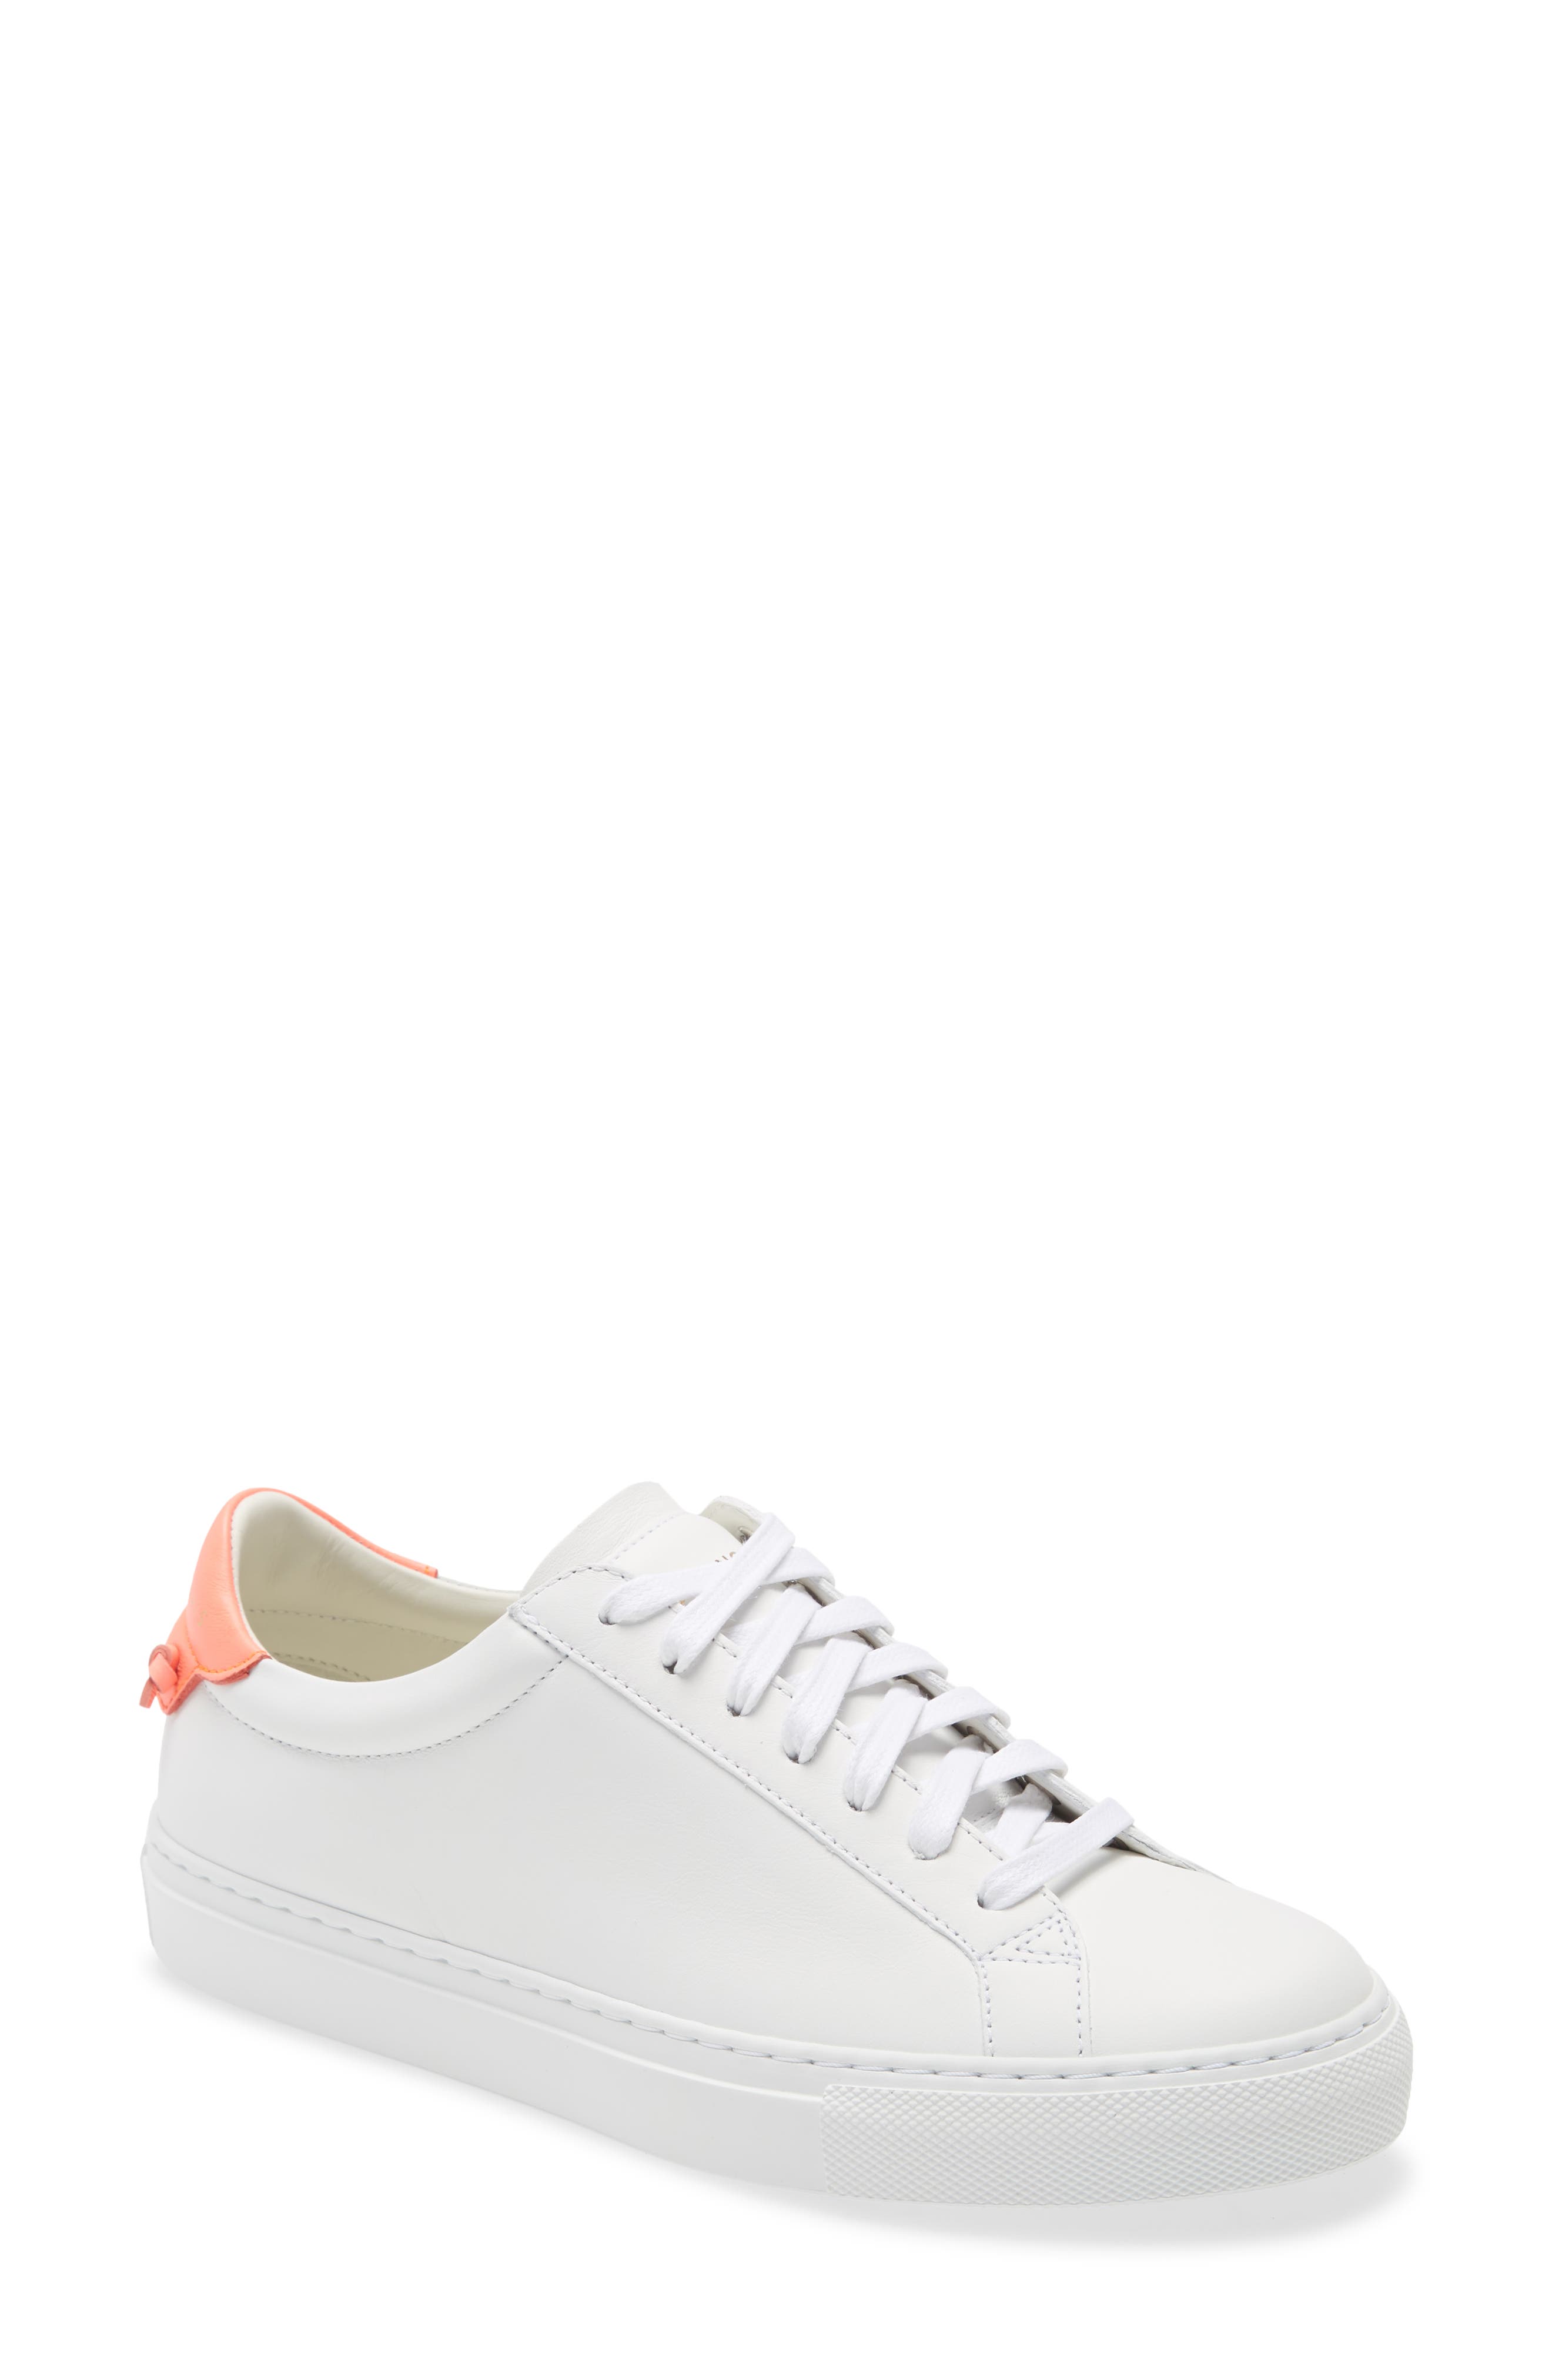 white tennis shoes nordstrom